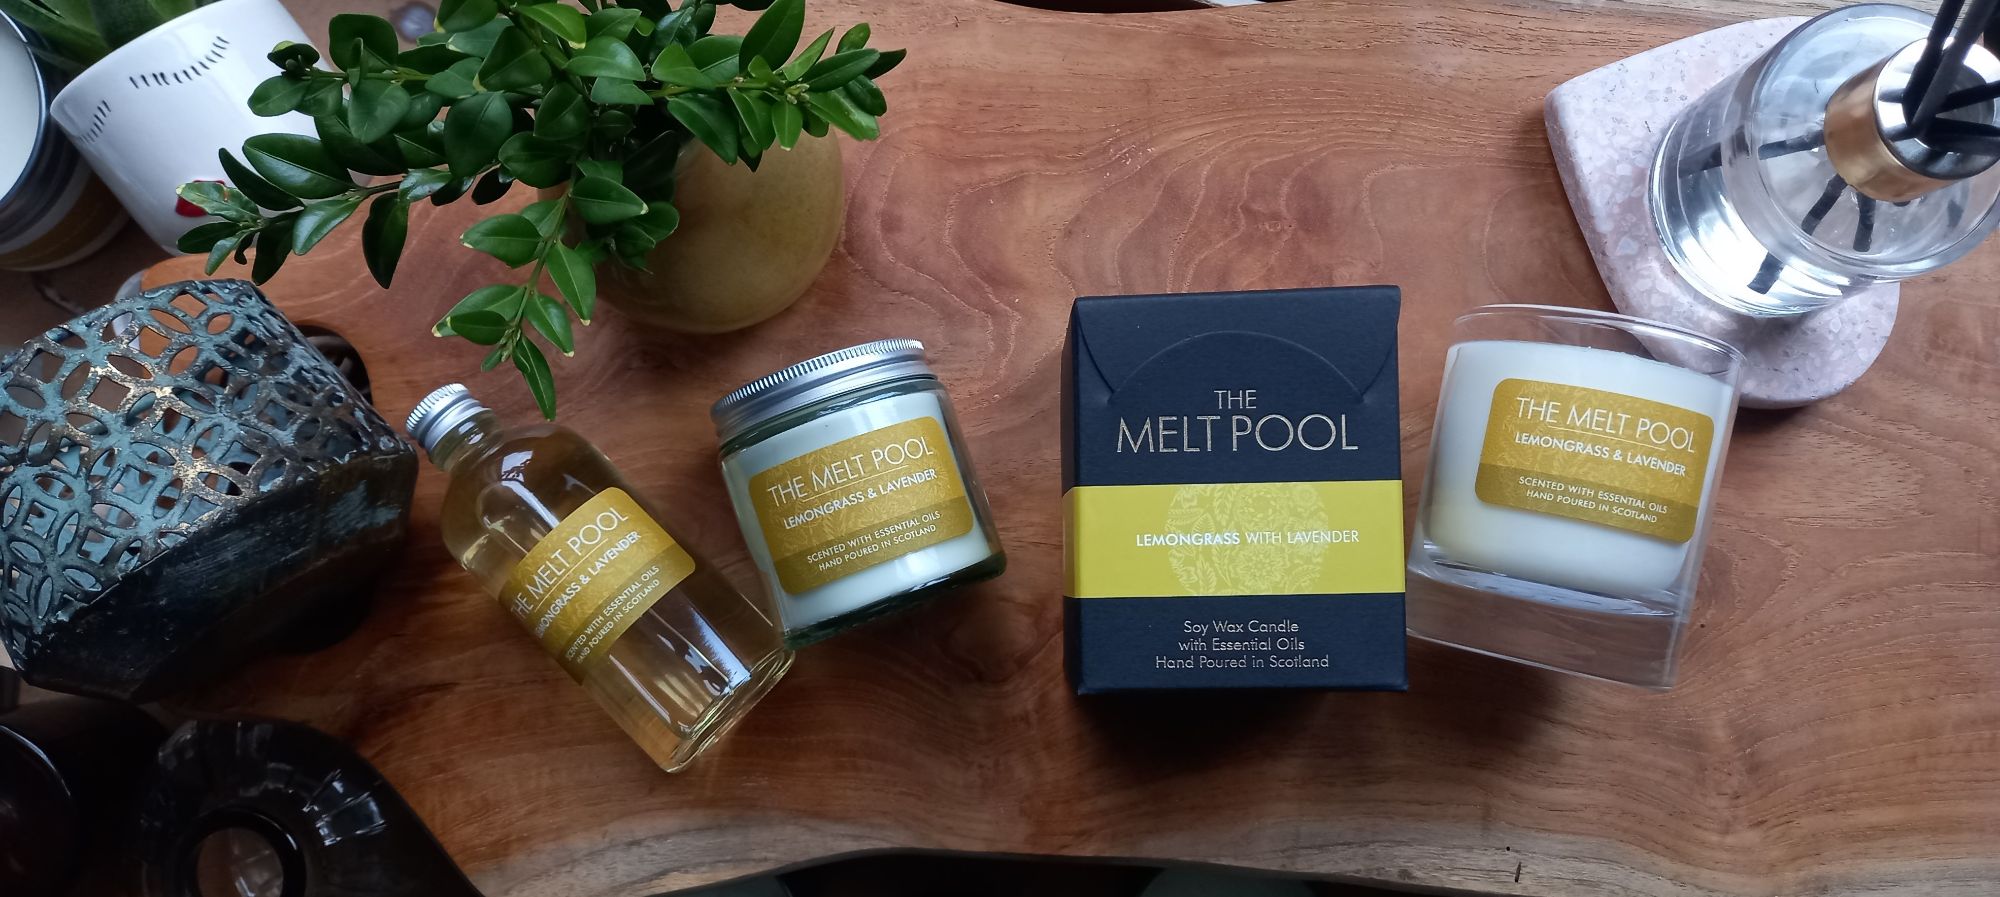 The Melt Pool Lemongrass and Lavender candles